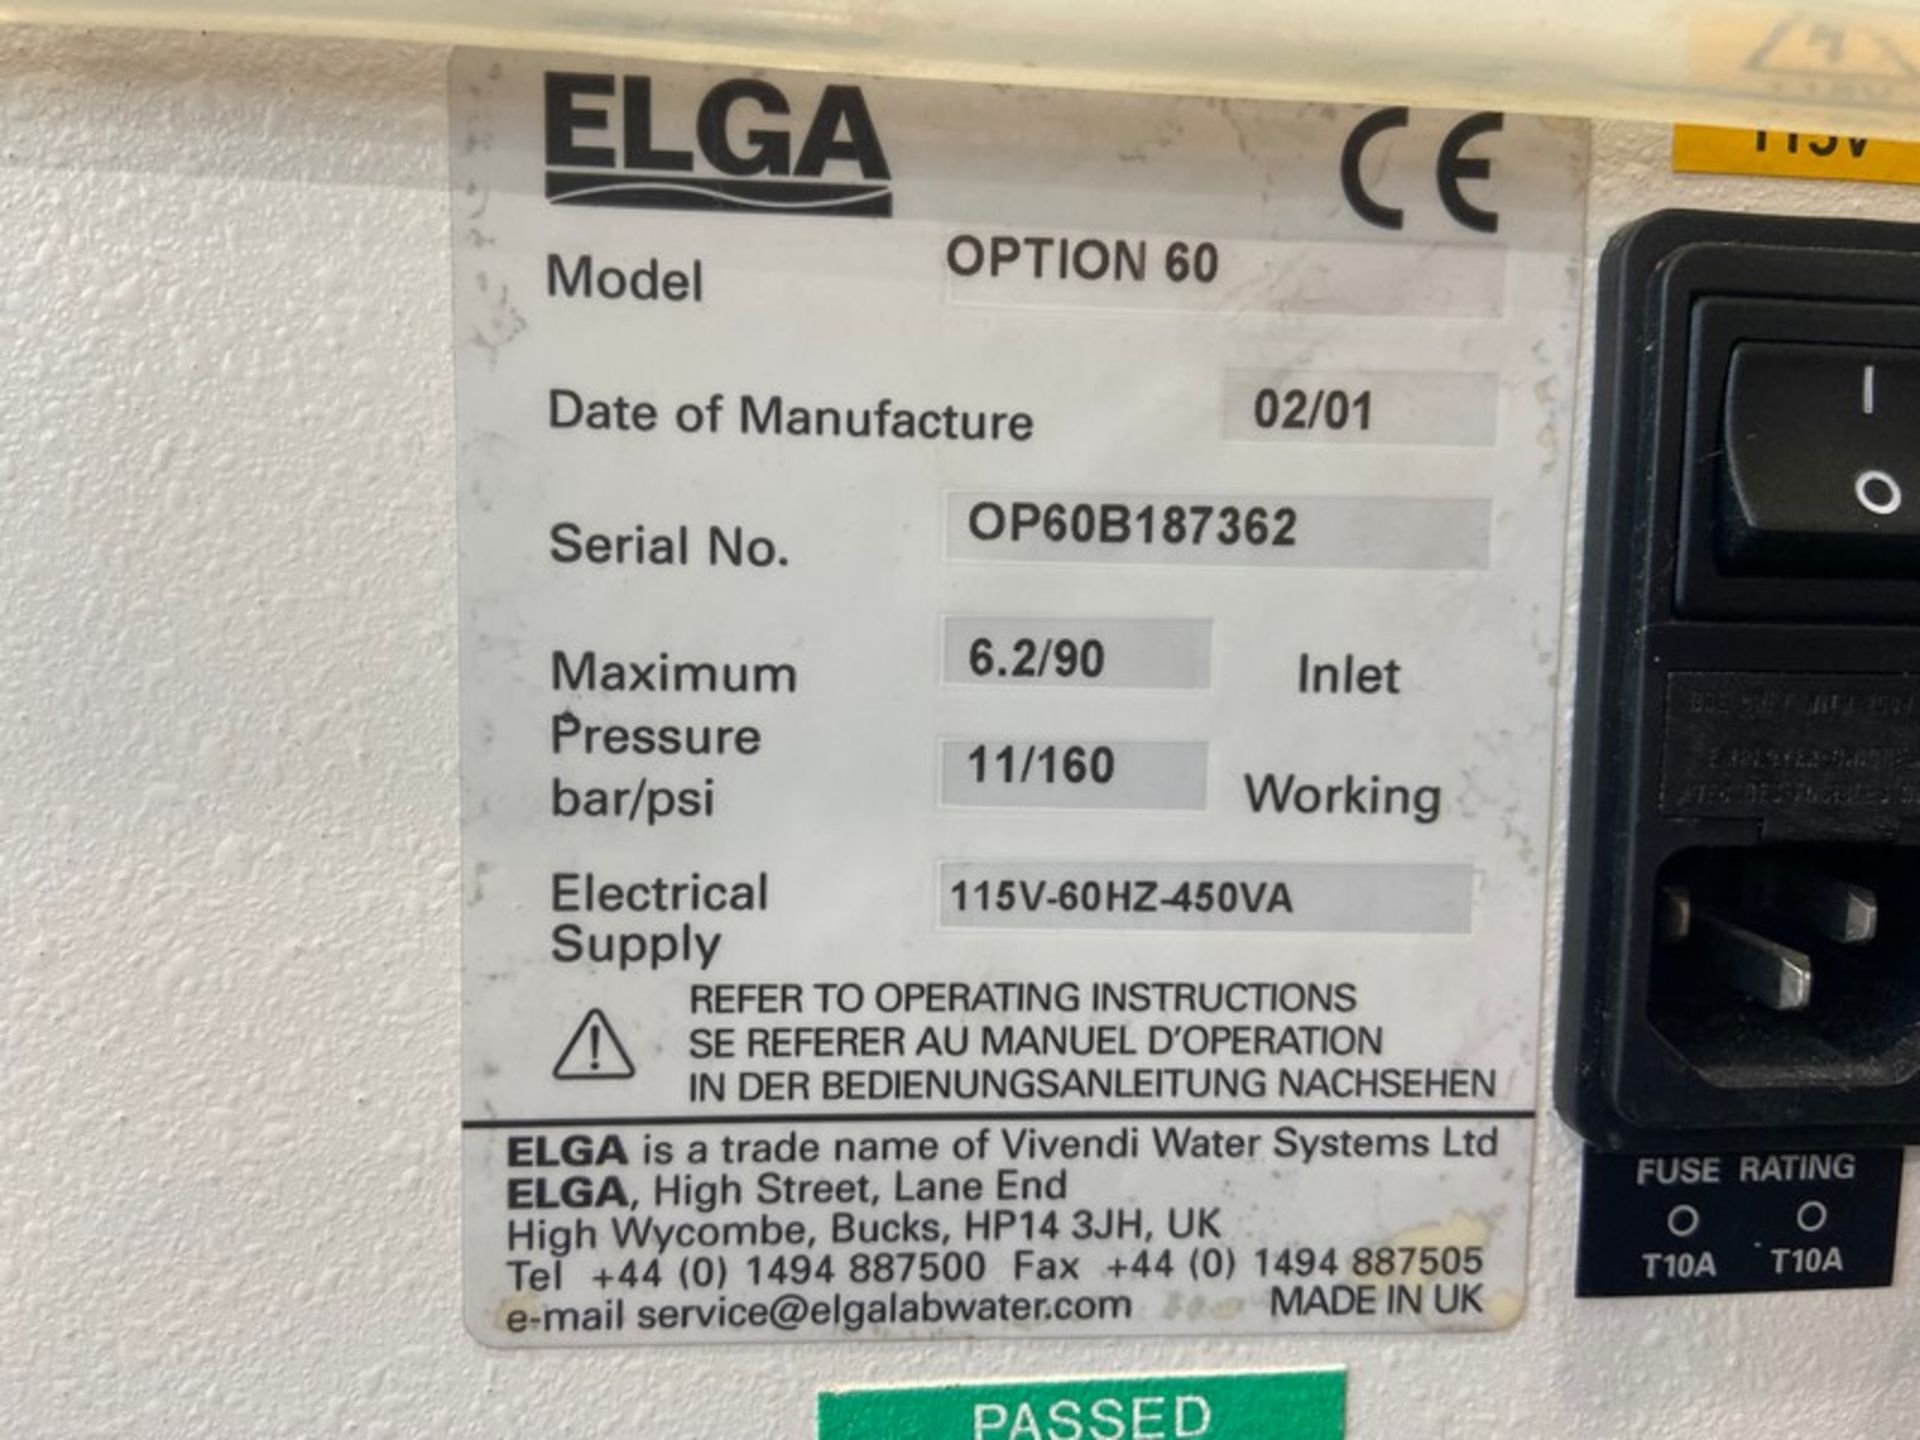 ELGA Water Purification System, M/N Option 60, S/N OP60B187362 (INV#99496) (Located @ the MDG - Image 3 of 5